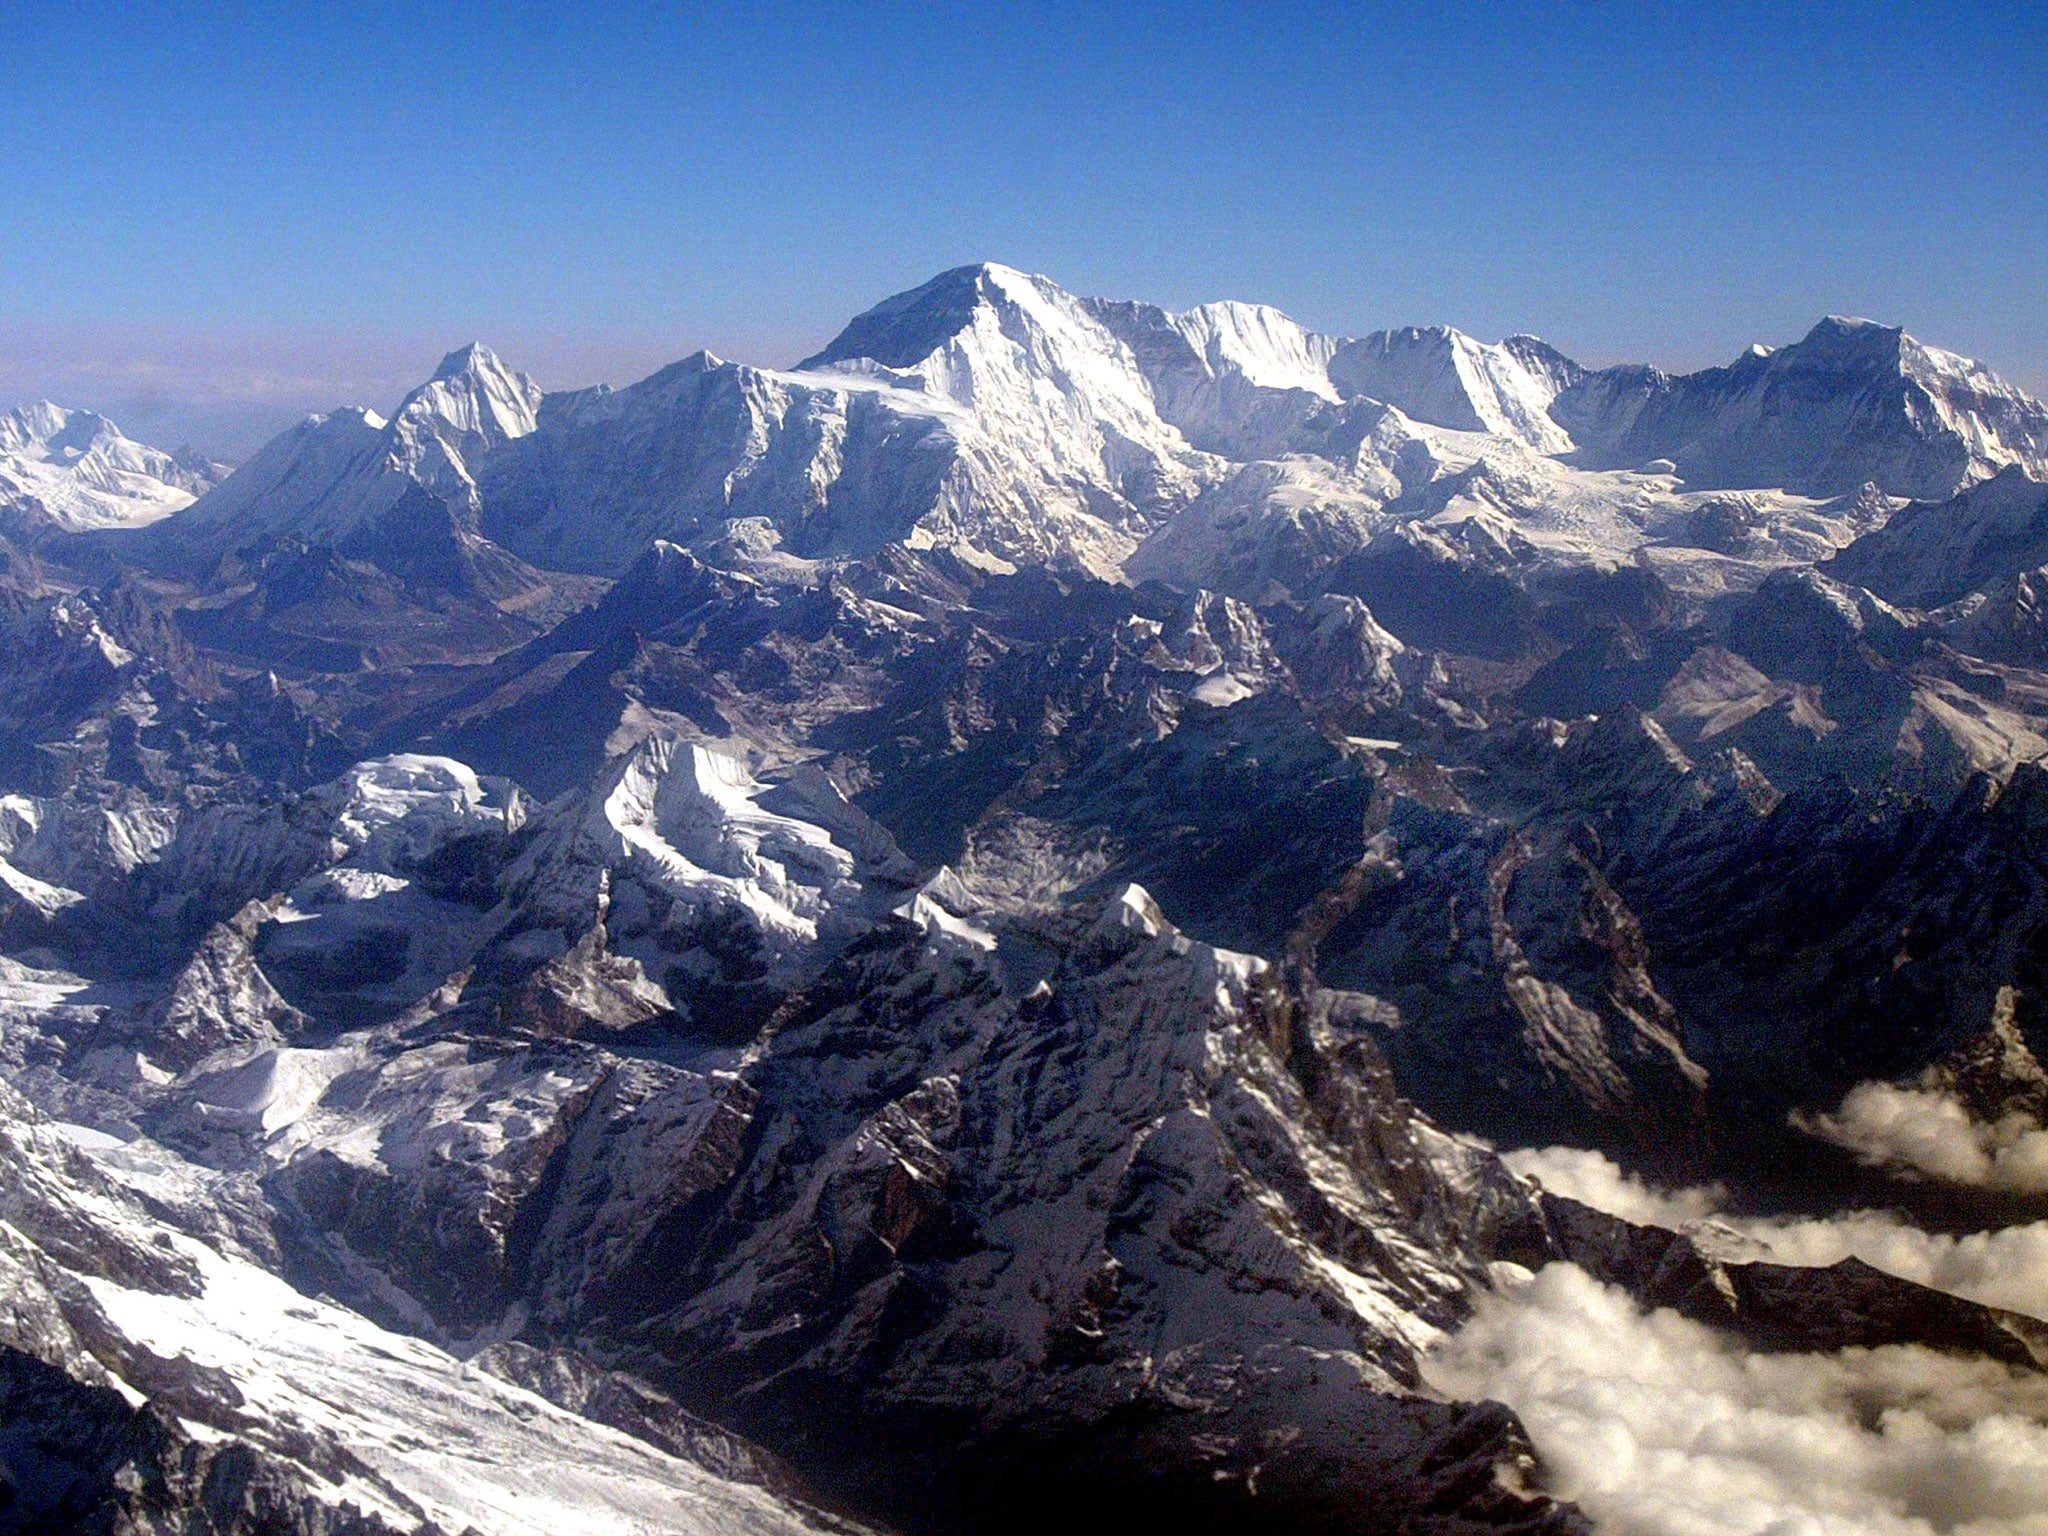 A series of disasters have halted Everest expeditions for the last two years